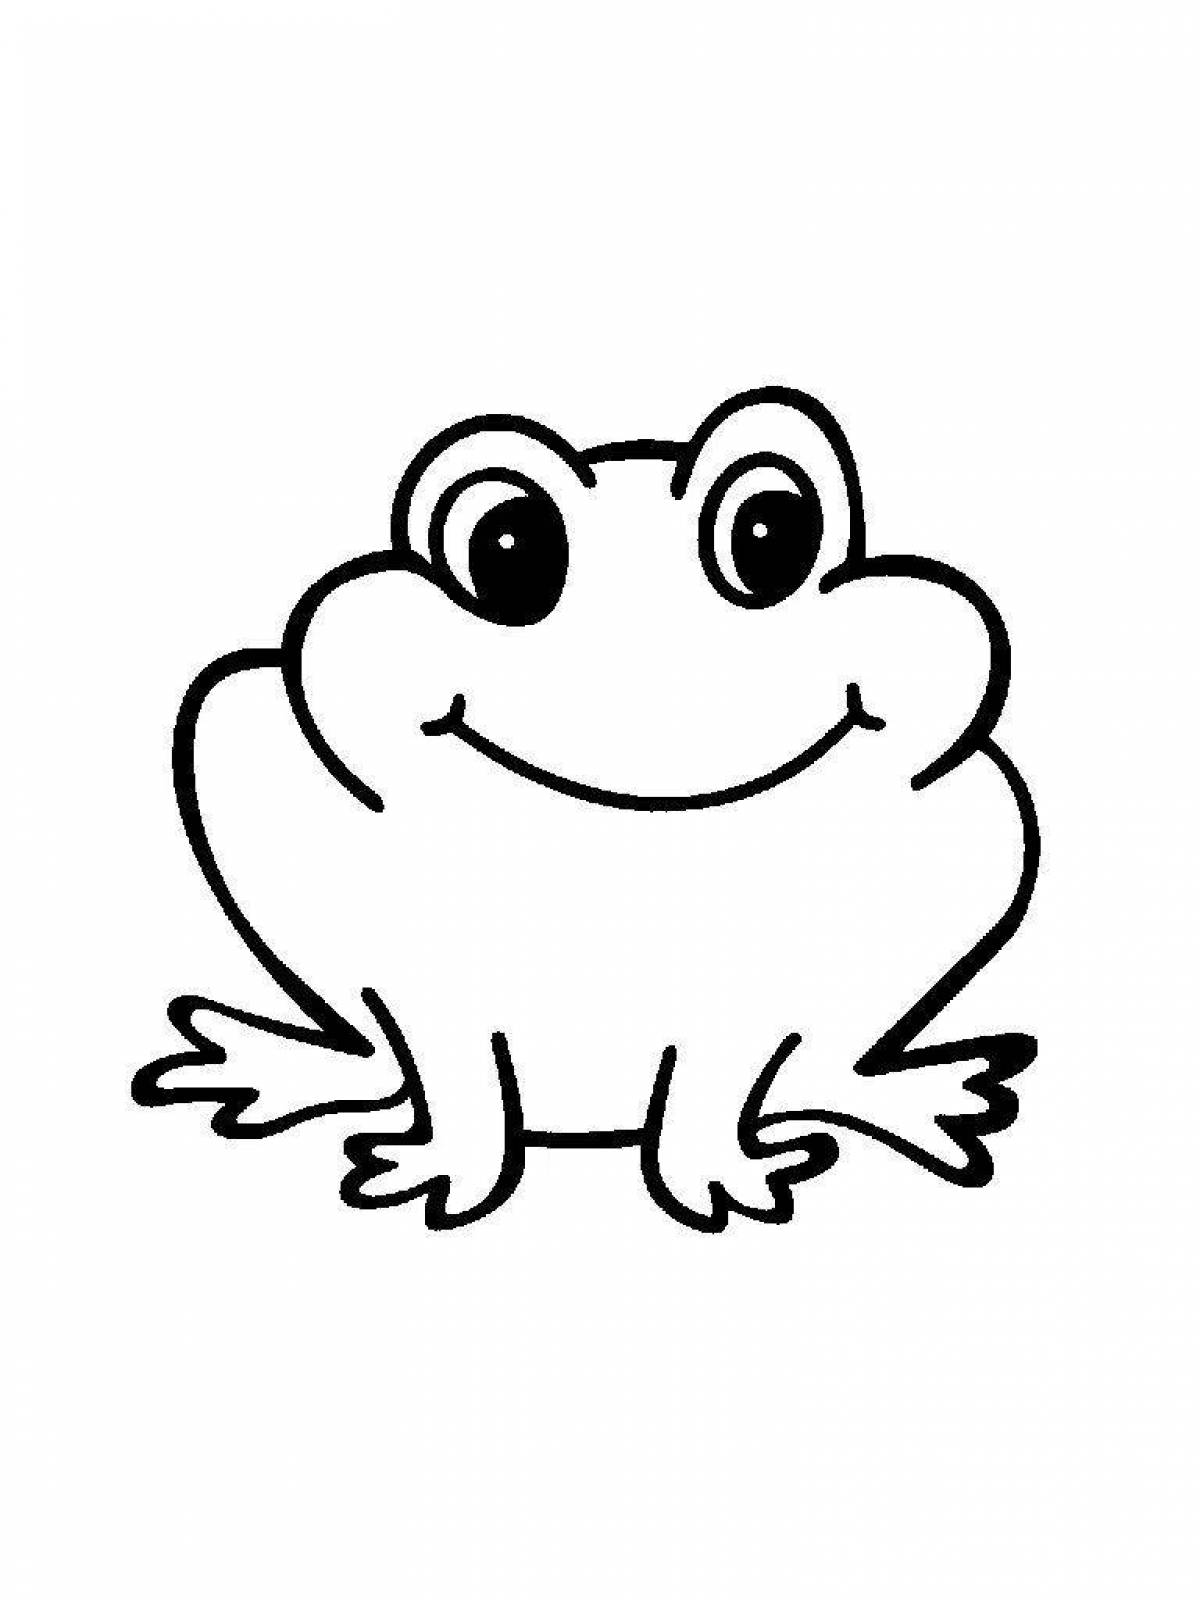 Coloring page cute frog frolicking